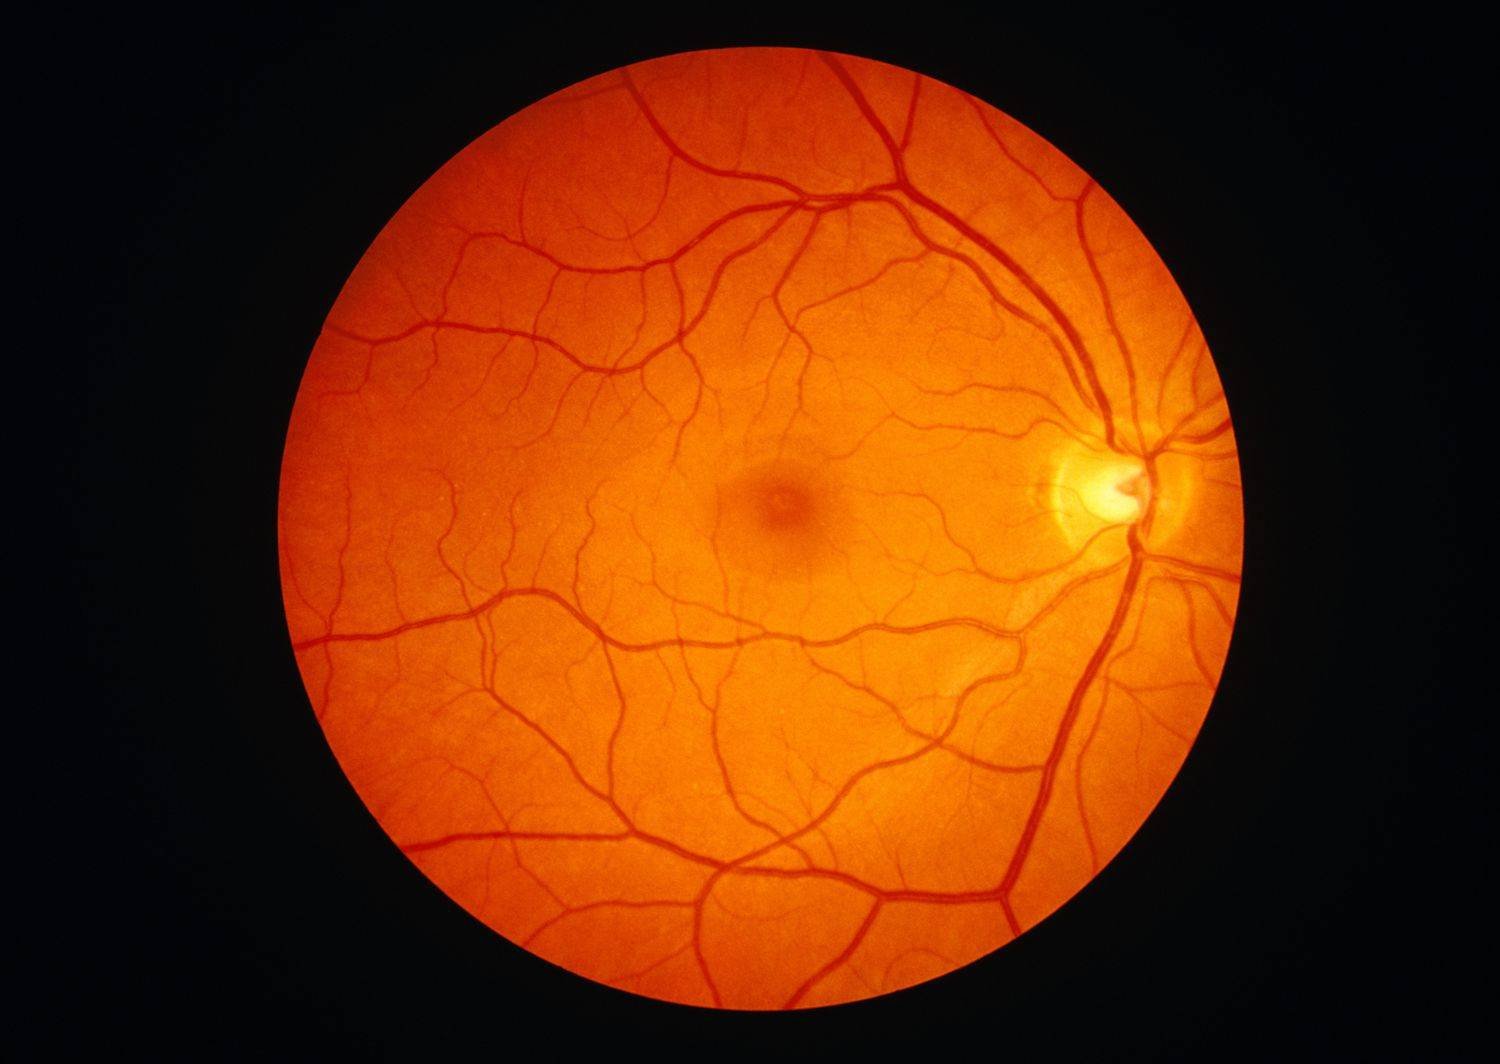 Study: Virus that causes COVID-19 can penetrate blood-retinal barrier and may damage vision